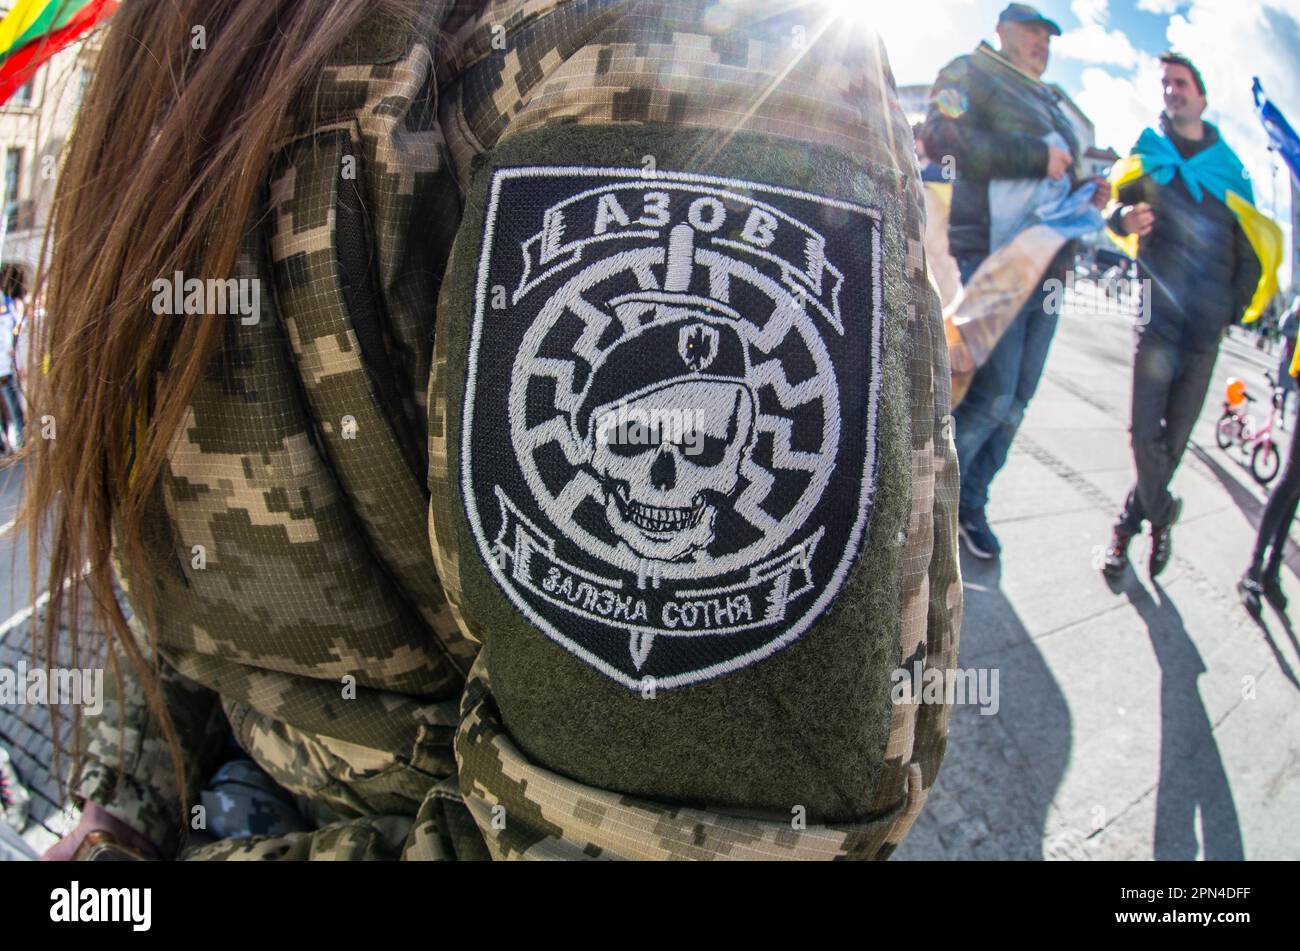 Munich, Bavaria, Germany. 25th Mar, 2023. A demonstrator in Munich, Germany wears patches of the former Azov Battalion after holding a speech about the Azovstal defenders of Mariupol, some of whom are still in Russian captivity. The former Azov Battalion was converted to the Azov Regiment and the highly taboo Wolfsangel displayed here was changed and forbidden. Such displays in Germany are currently isolated incidents and there is currently no evidence of neonazi influence at the demos. Many who demonstrate for the plight of the Azovstal defenders conflate them with the Azov Regiment who were Stock Photo